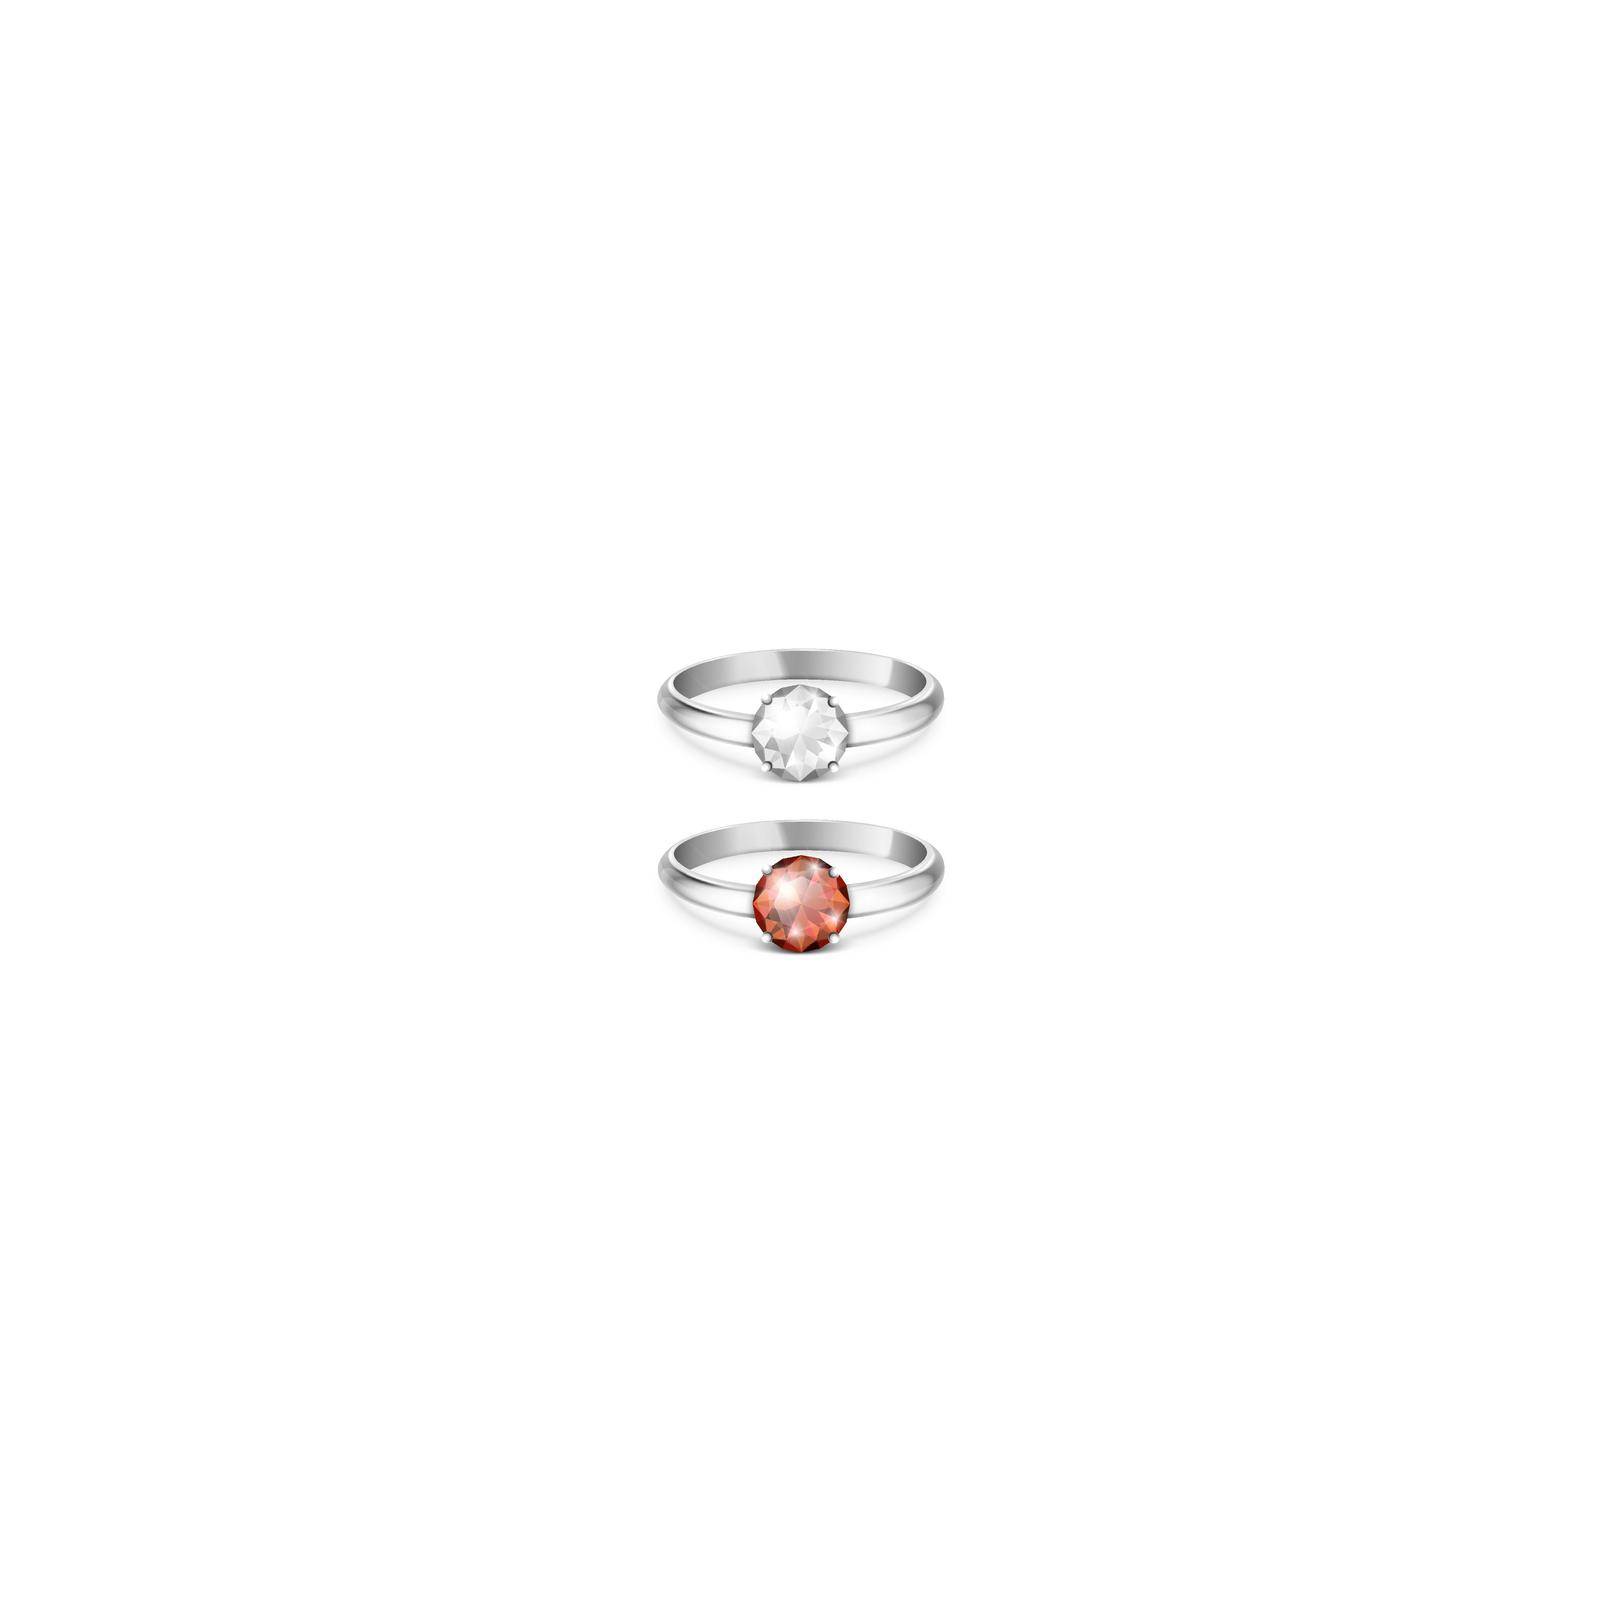 Vector 3d Realistic Silver Metal Wedding Ring with White and Red Gemstone, Diamond Closeup Isolated. Design Template of Shiny Golden Ring. Side, Front View.